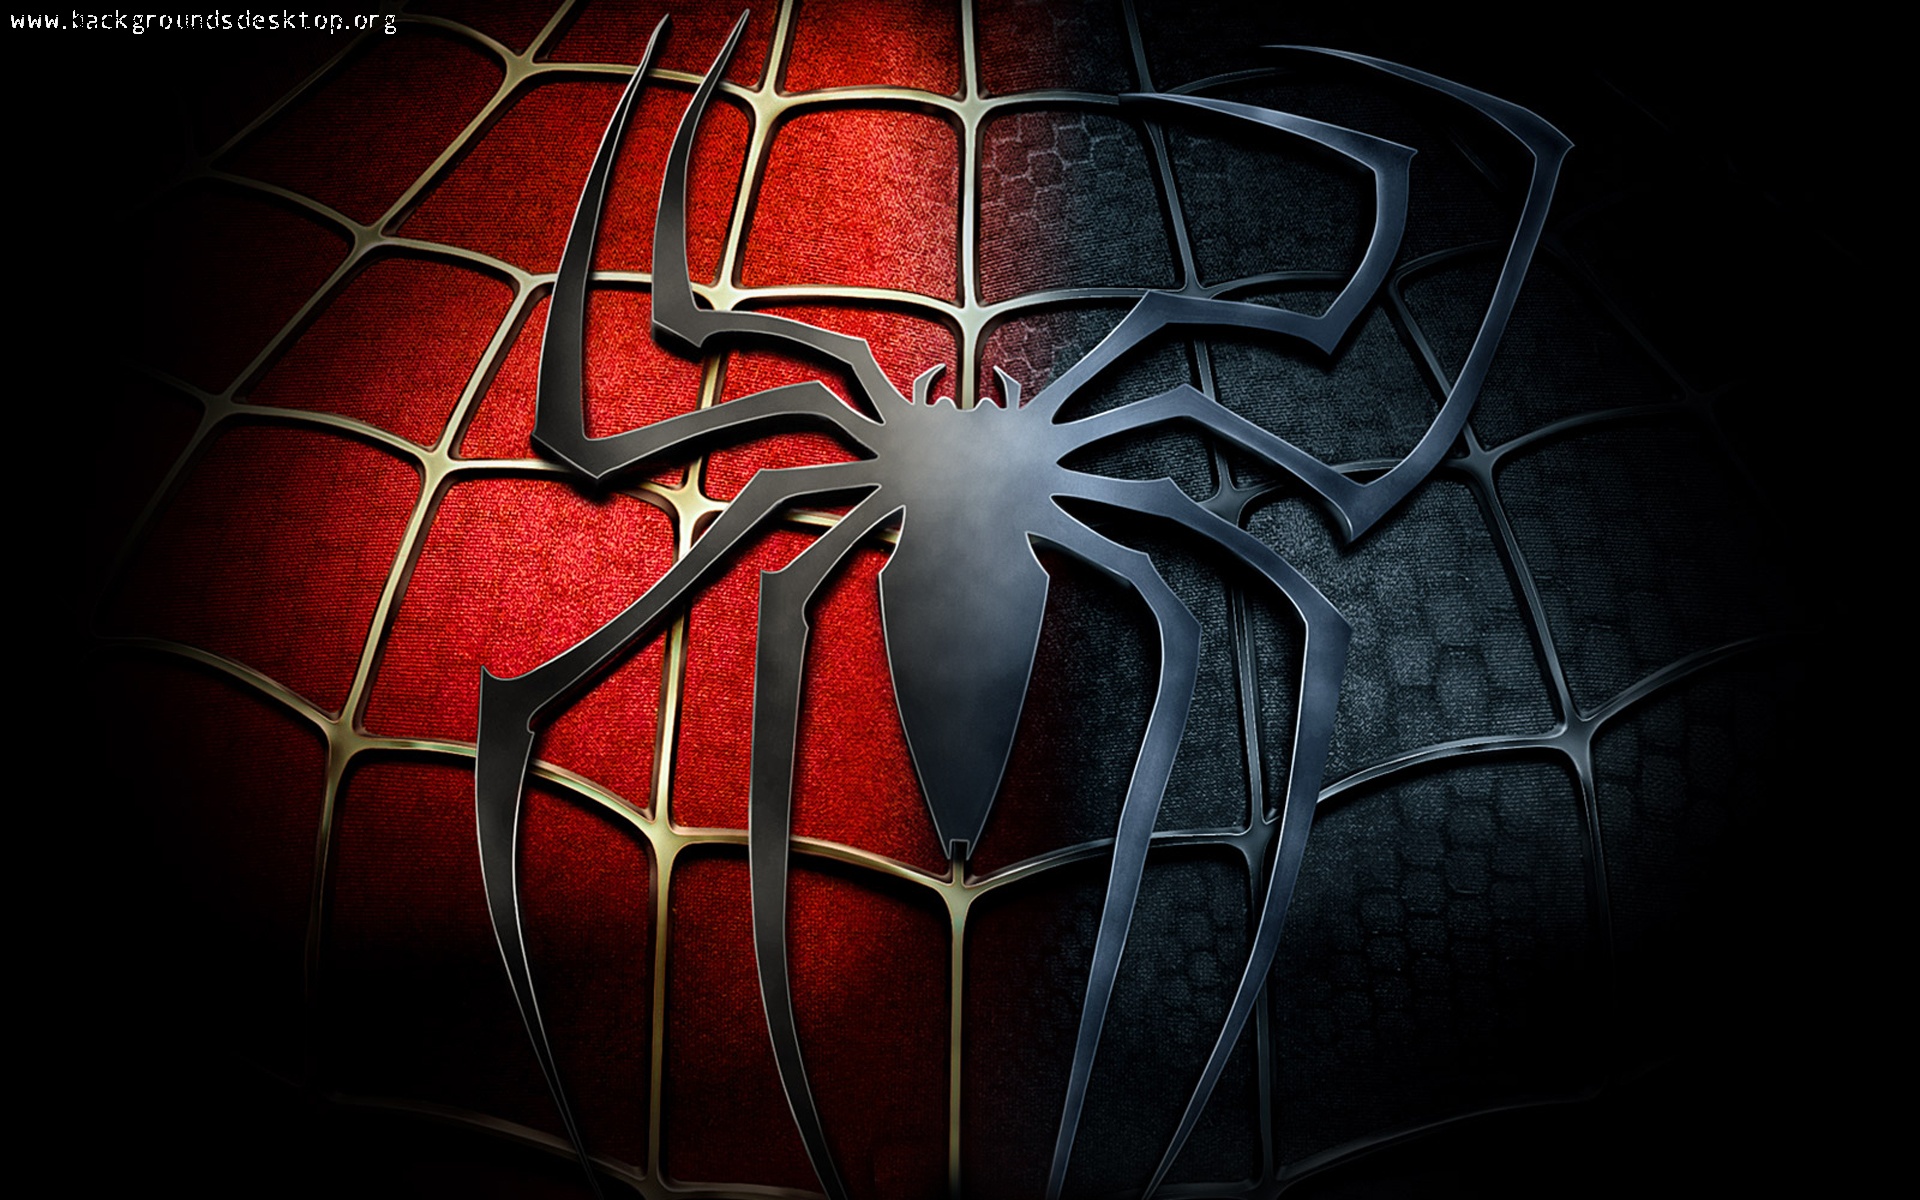 Hd wallpapers of spiderman 4